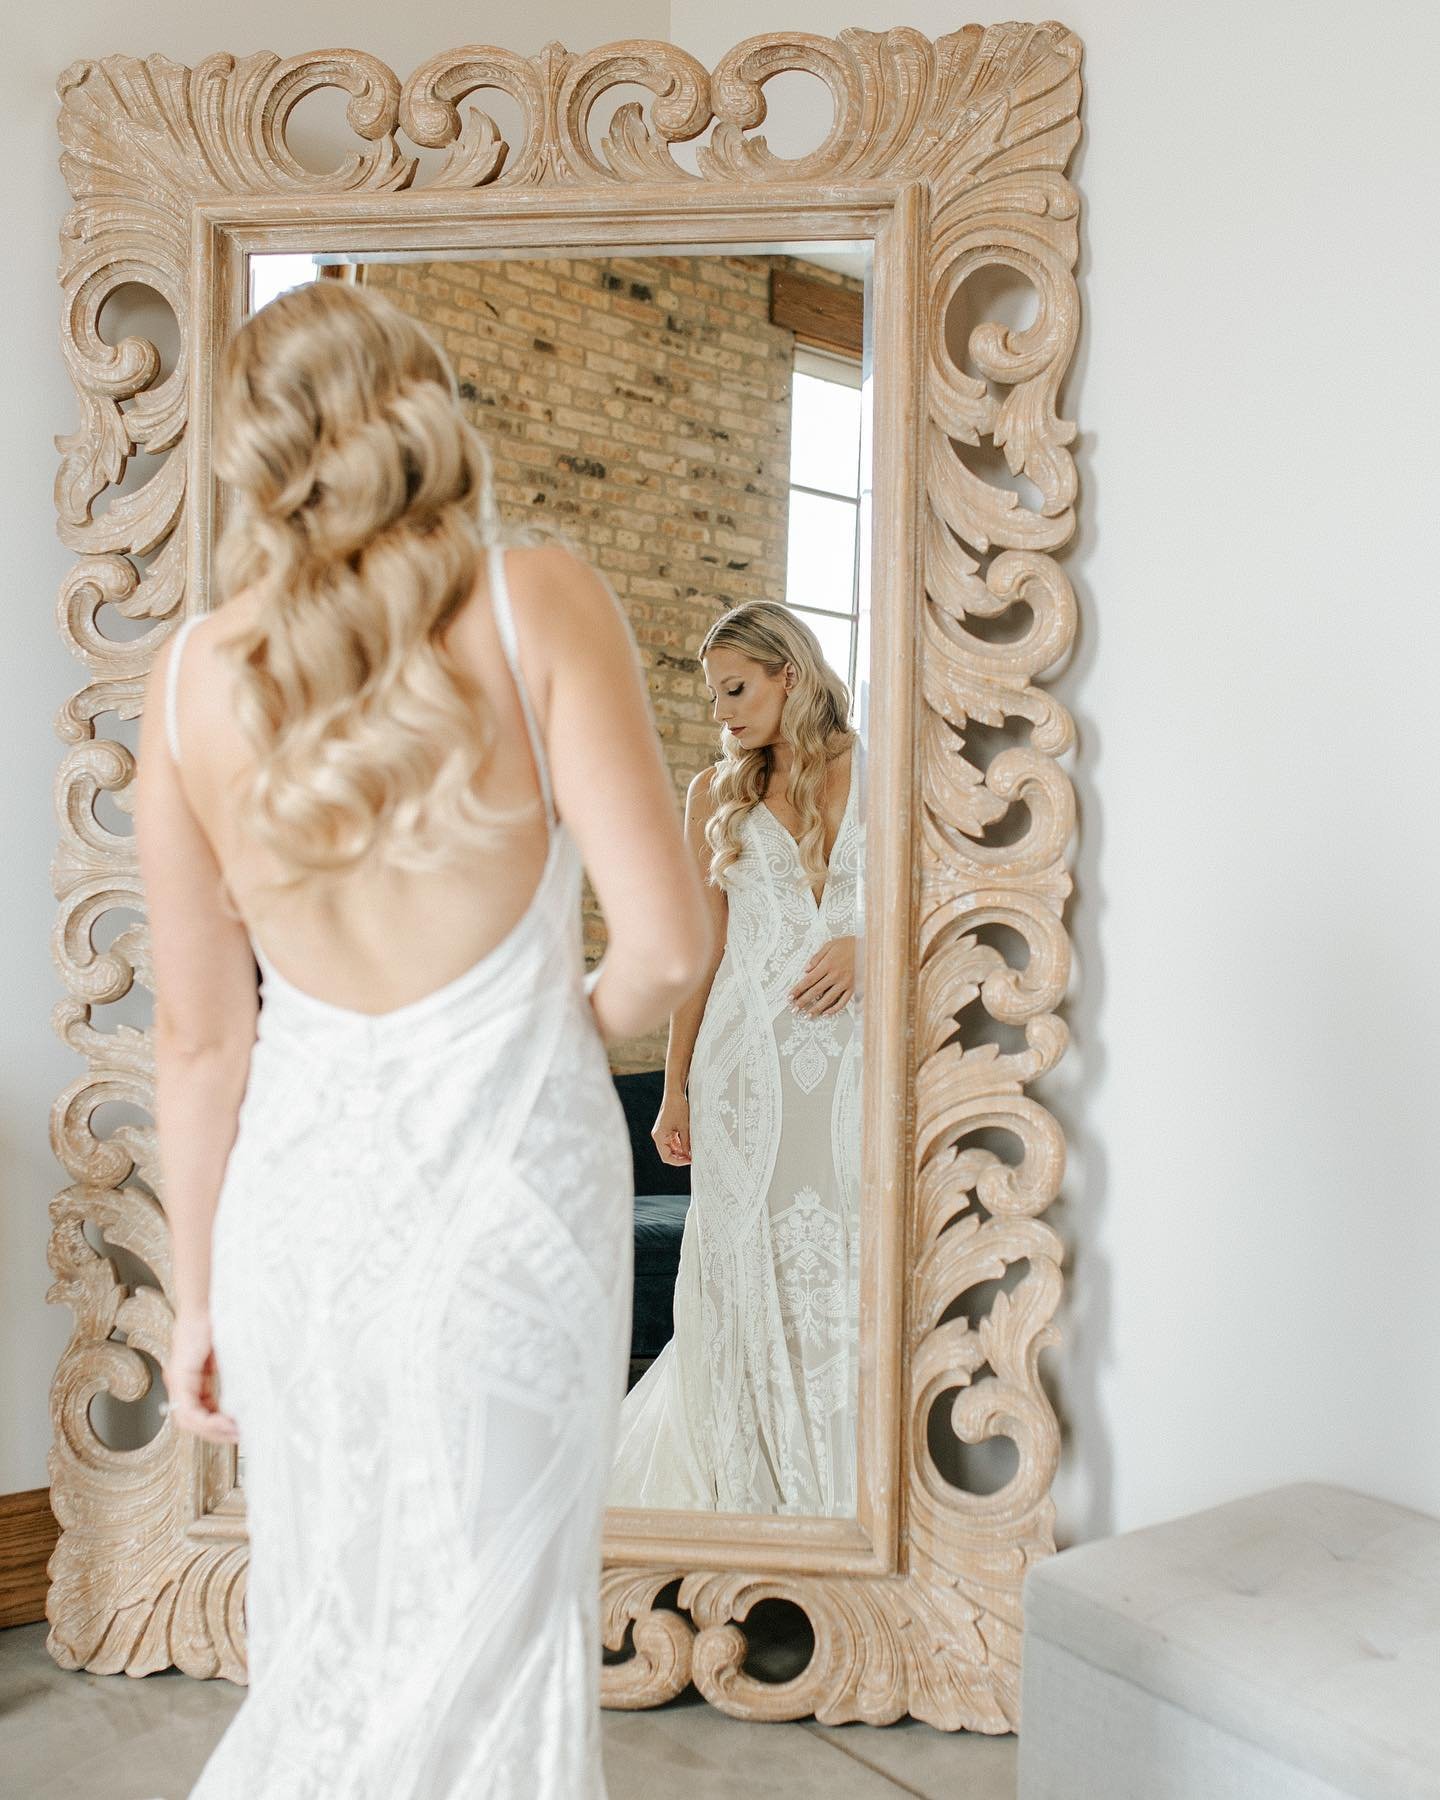 Becky getting read at The Brix. #orlandoweddingphotographer #tampaweddingphotographer#floridaweddingphotographer 
#chicagoweddingphotographer
#sandiegoweddingphotographer
#documentaryweddingphotographer